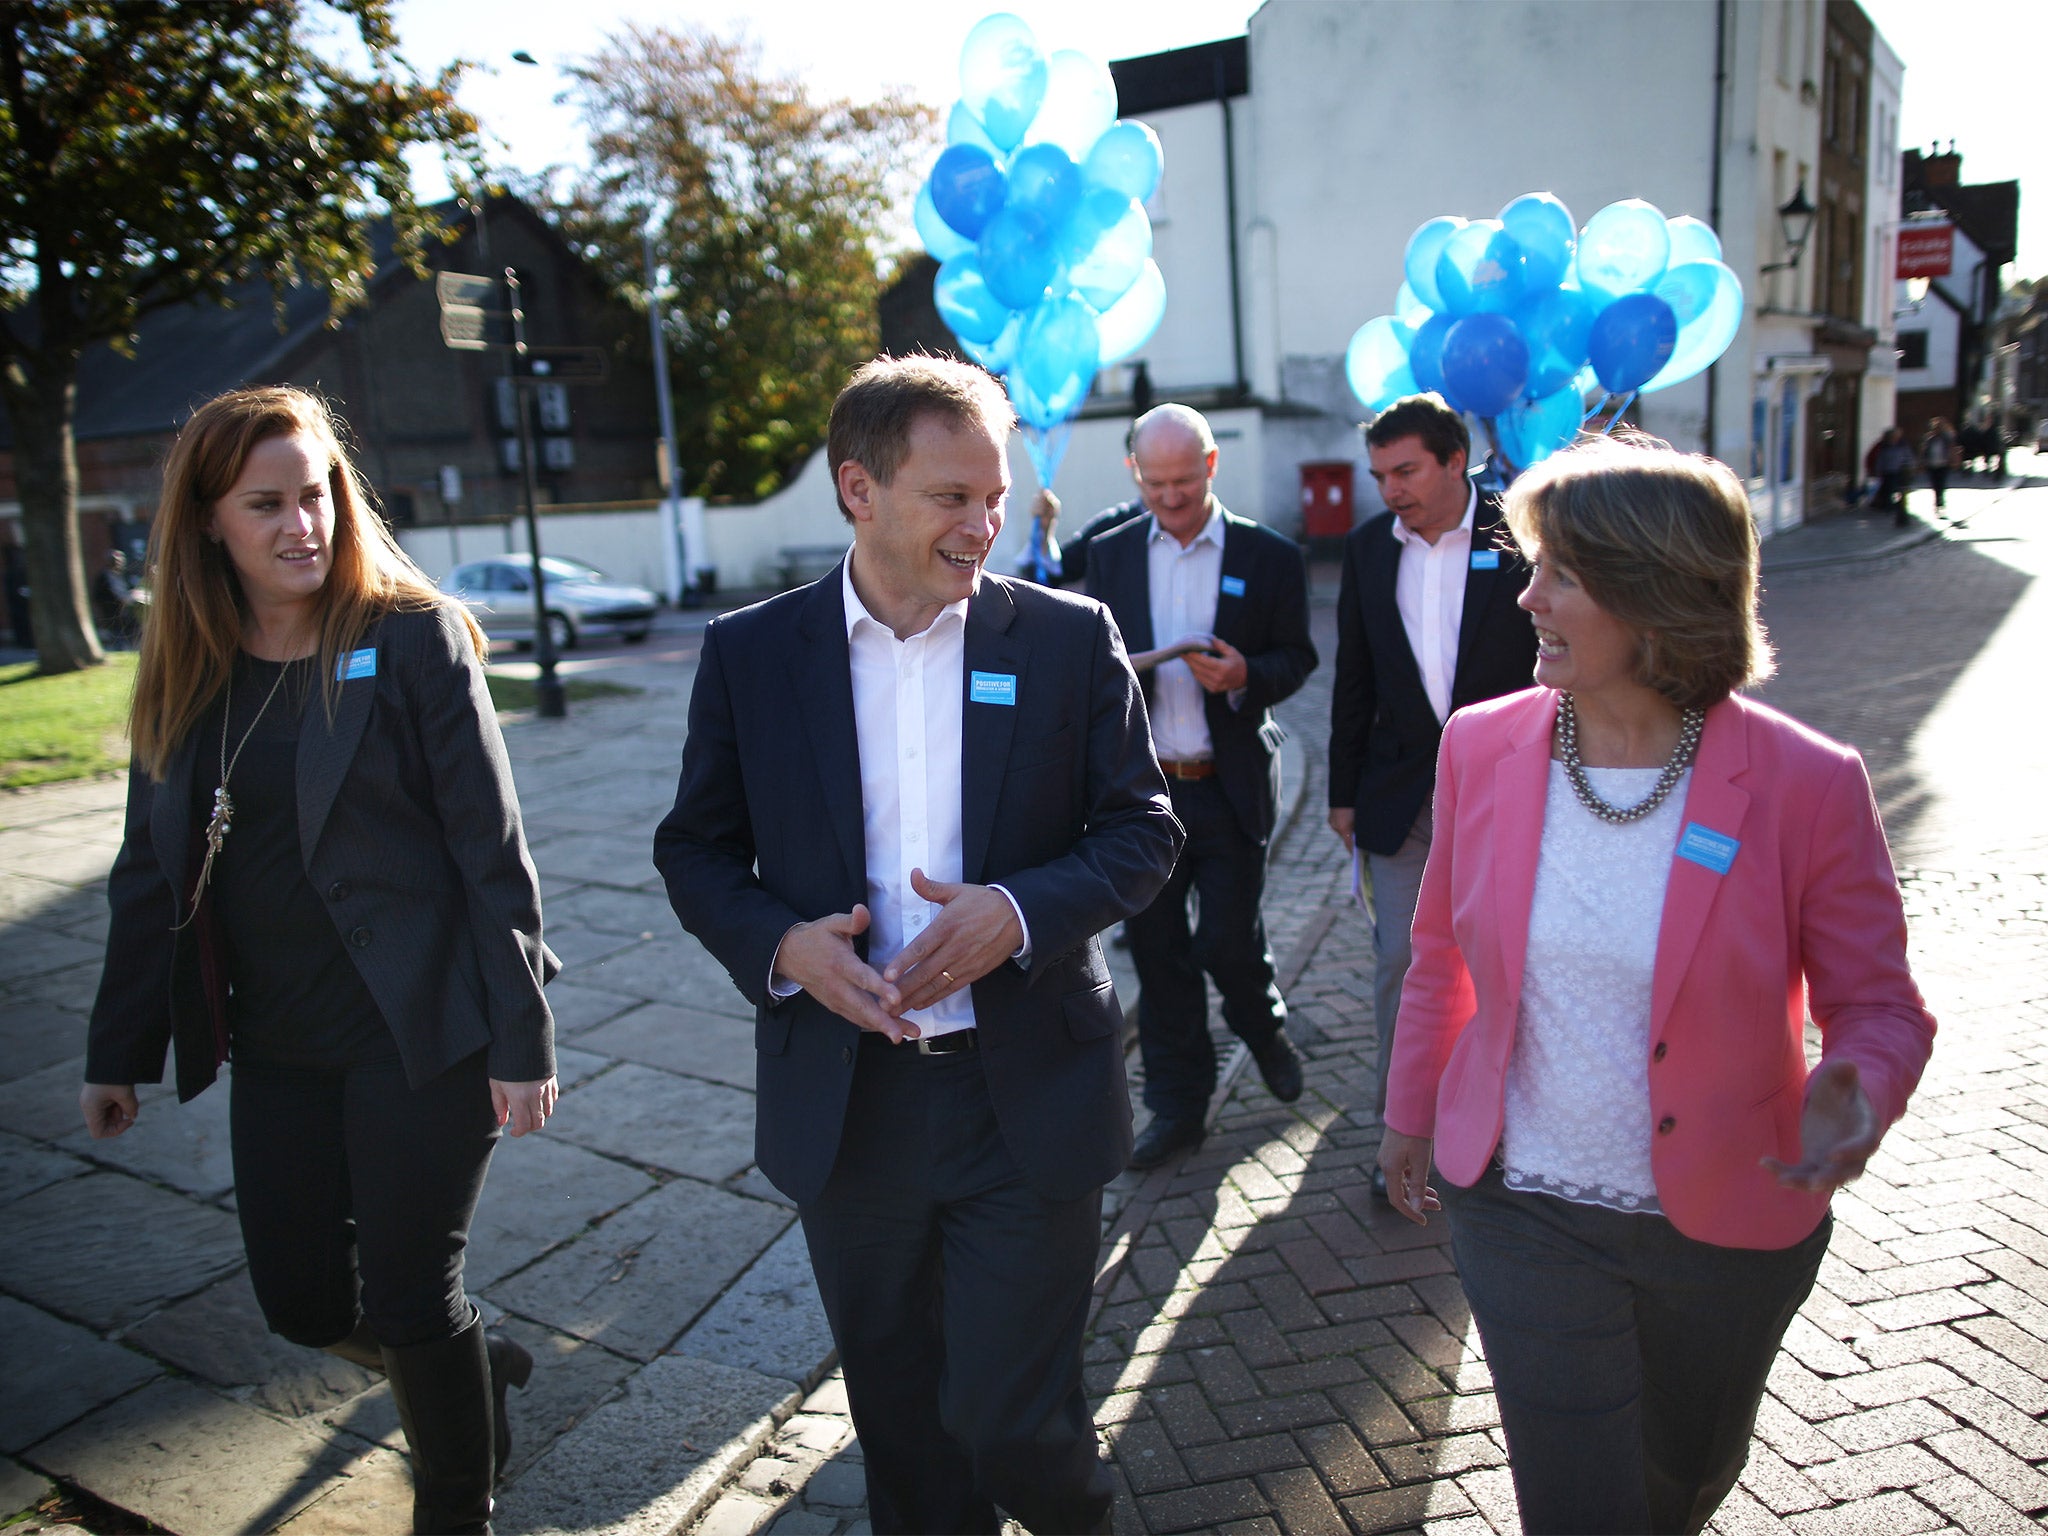 Prospective Conservative candidates Kelly Tolhurst and Anna Firth with party chairman Grant Shapps in Rochester this week